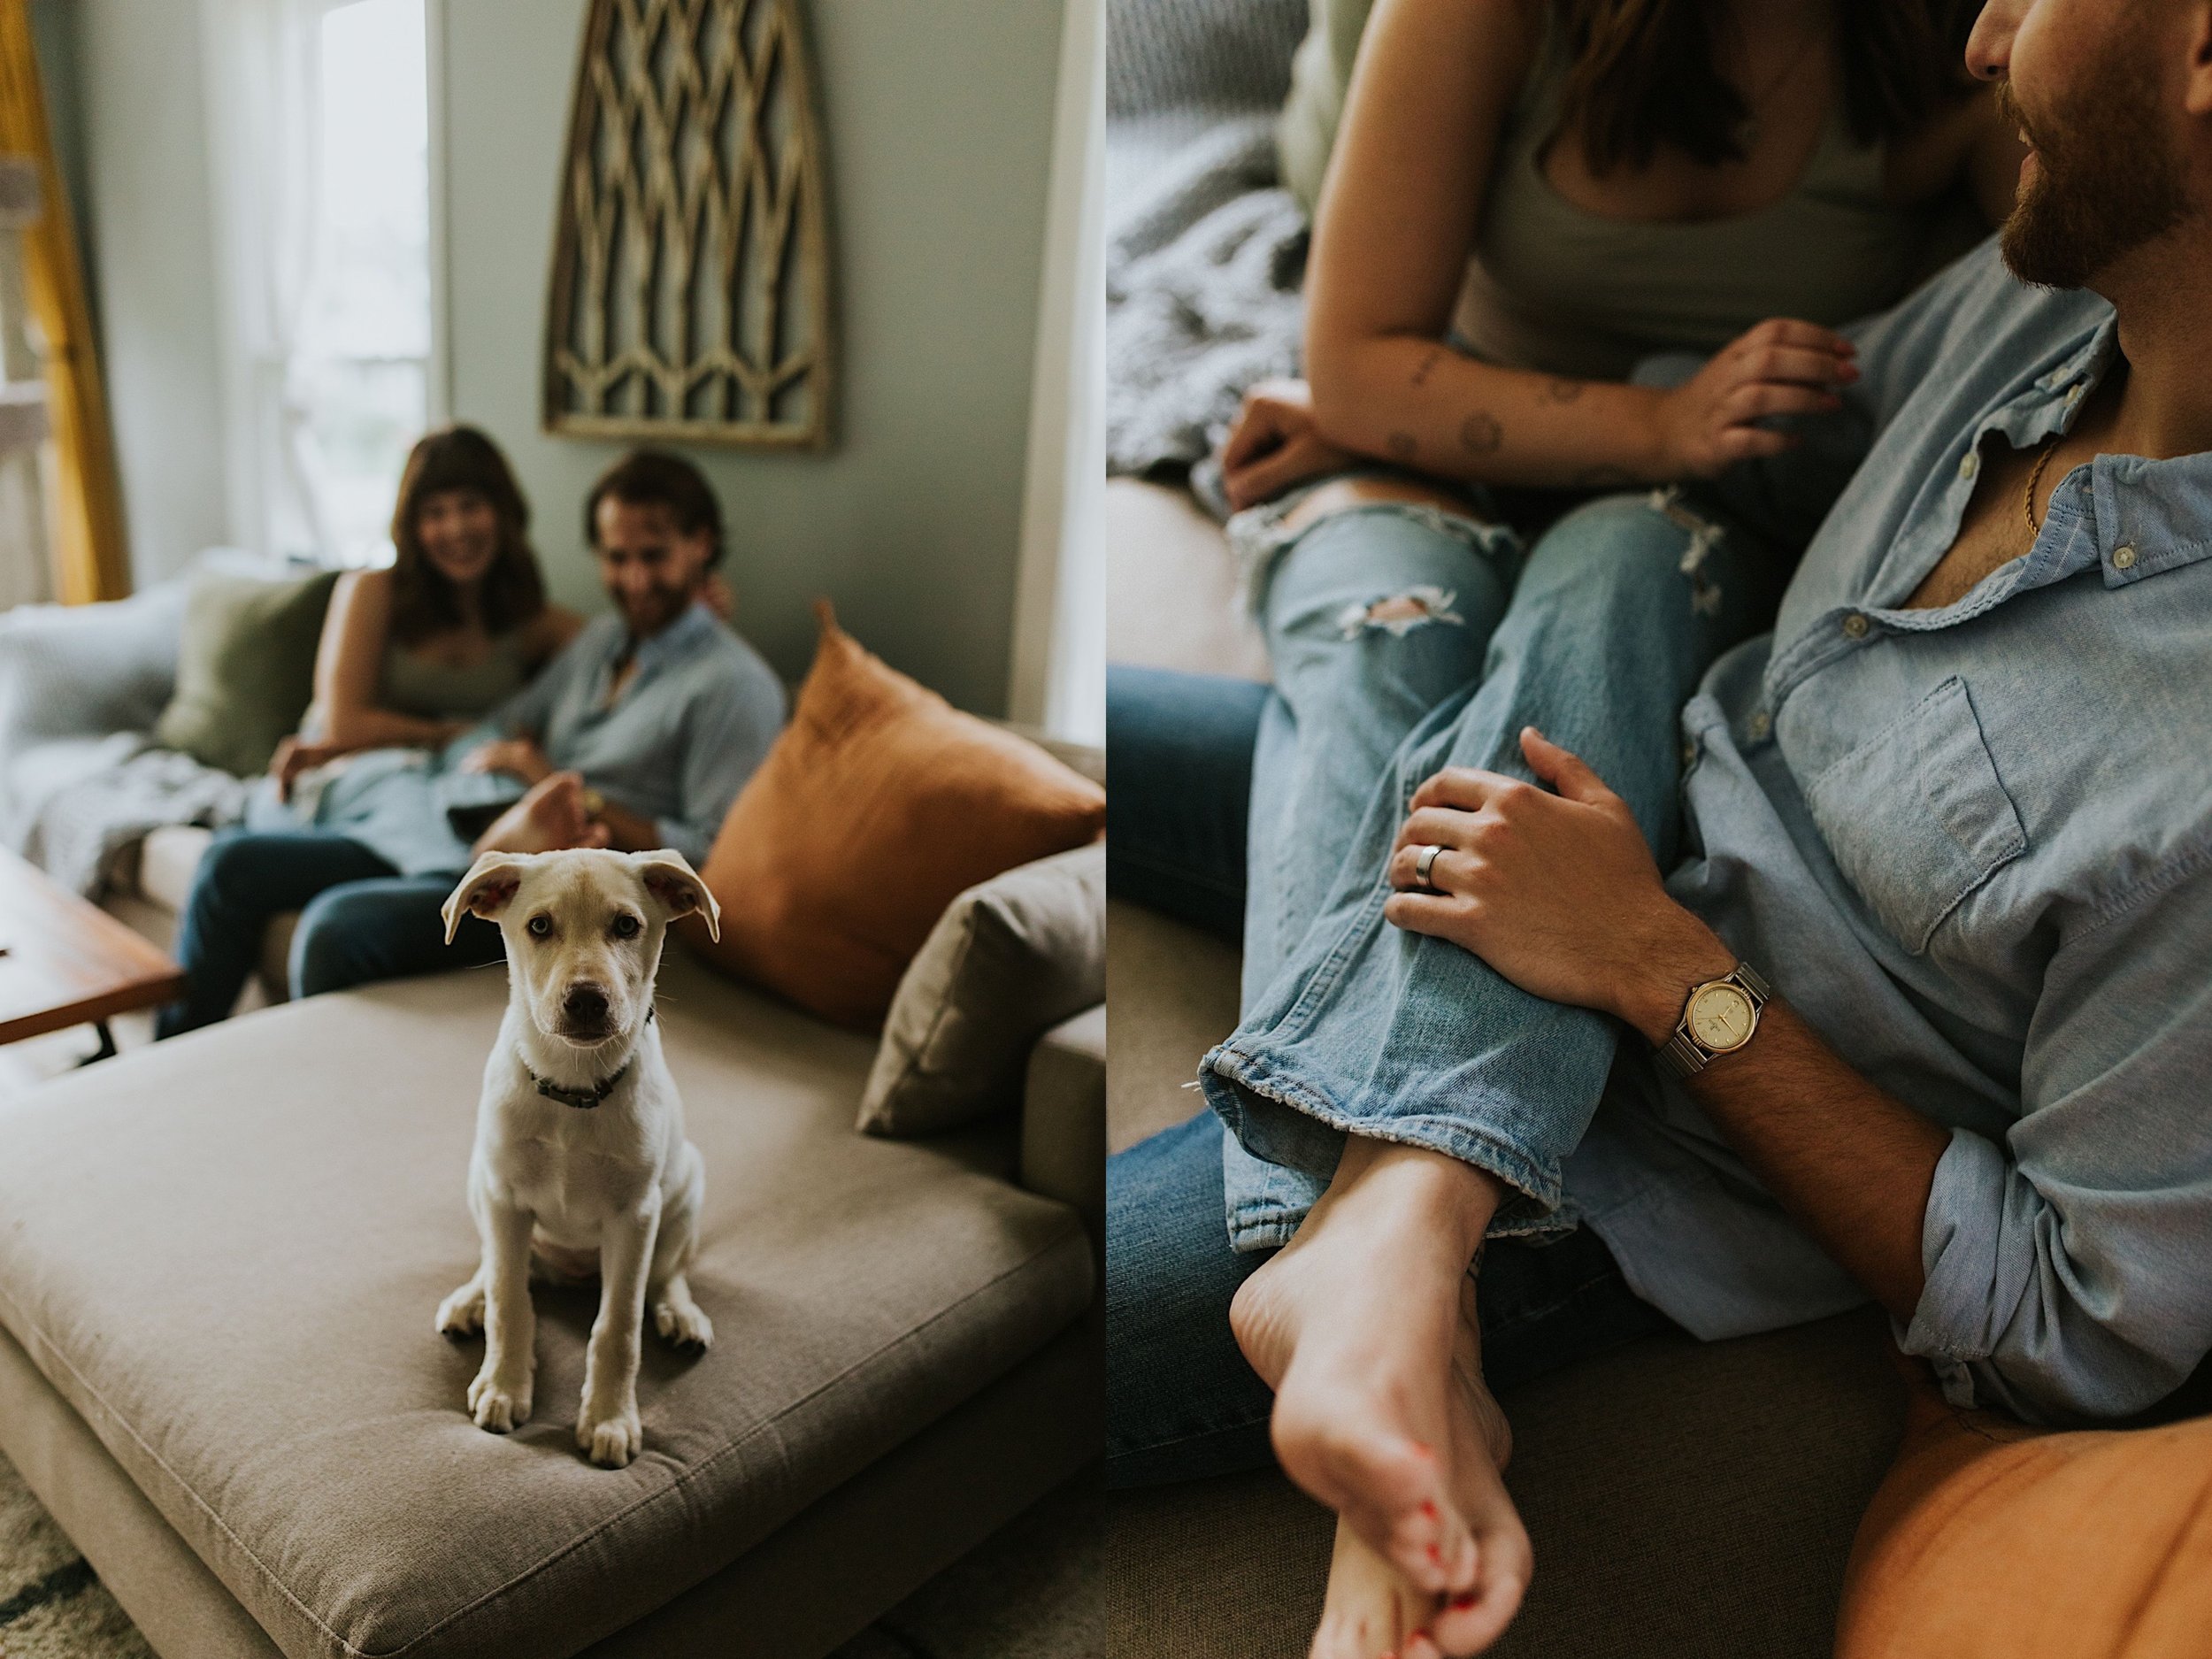 Right side image is of a dog sitting on the edge of the couch while their owners sit behind them smiling.  The left side image is a close up image of a husband holding the leg of his wife while they sit on the couch together.